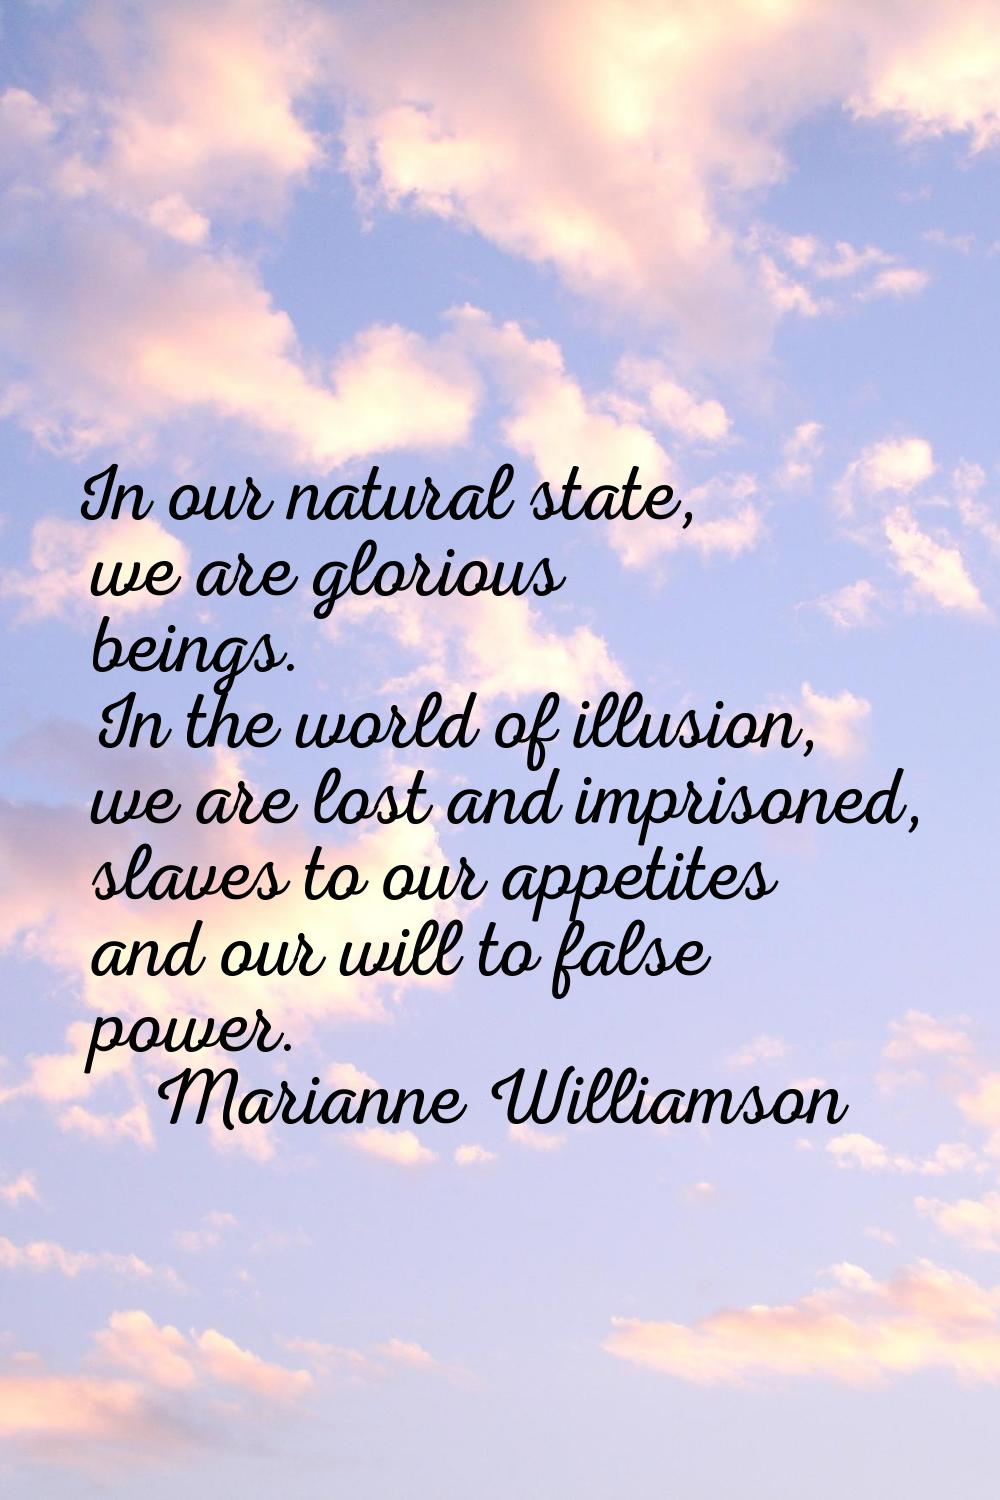 In our natural state, we are glorious beings. In the world of illusion, we are lost and imprisoned,